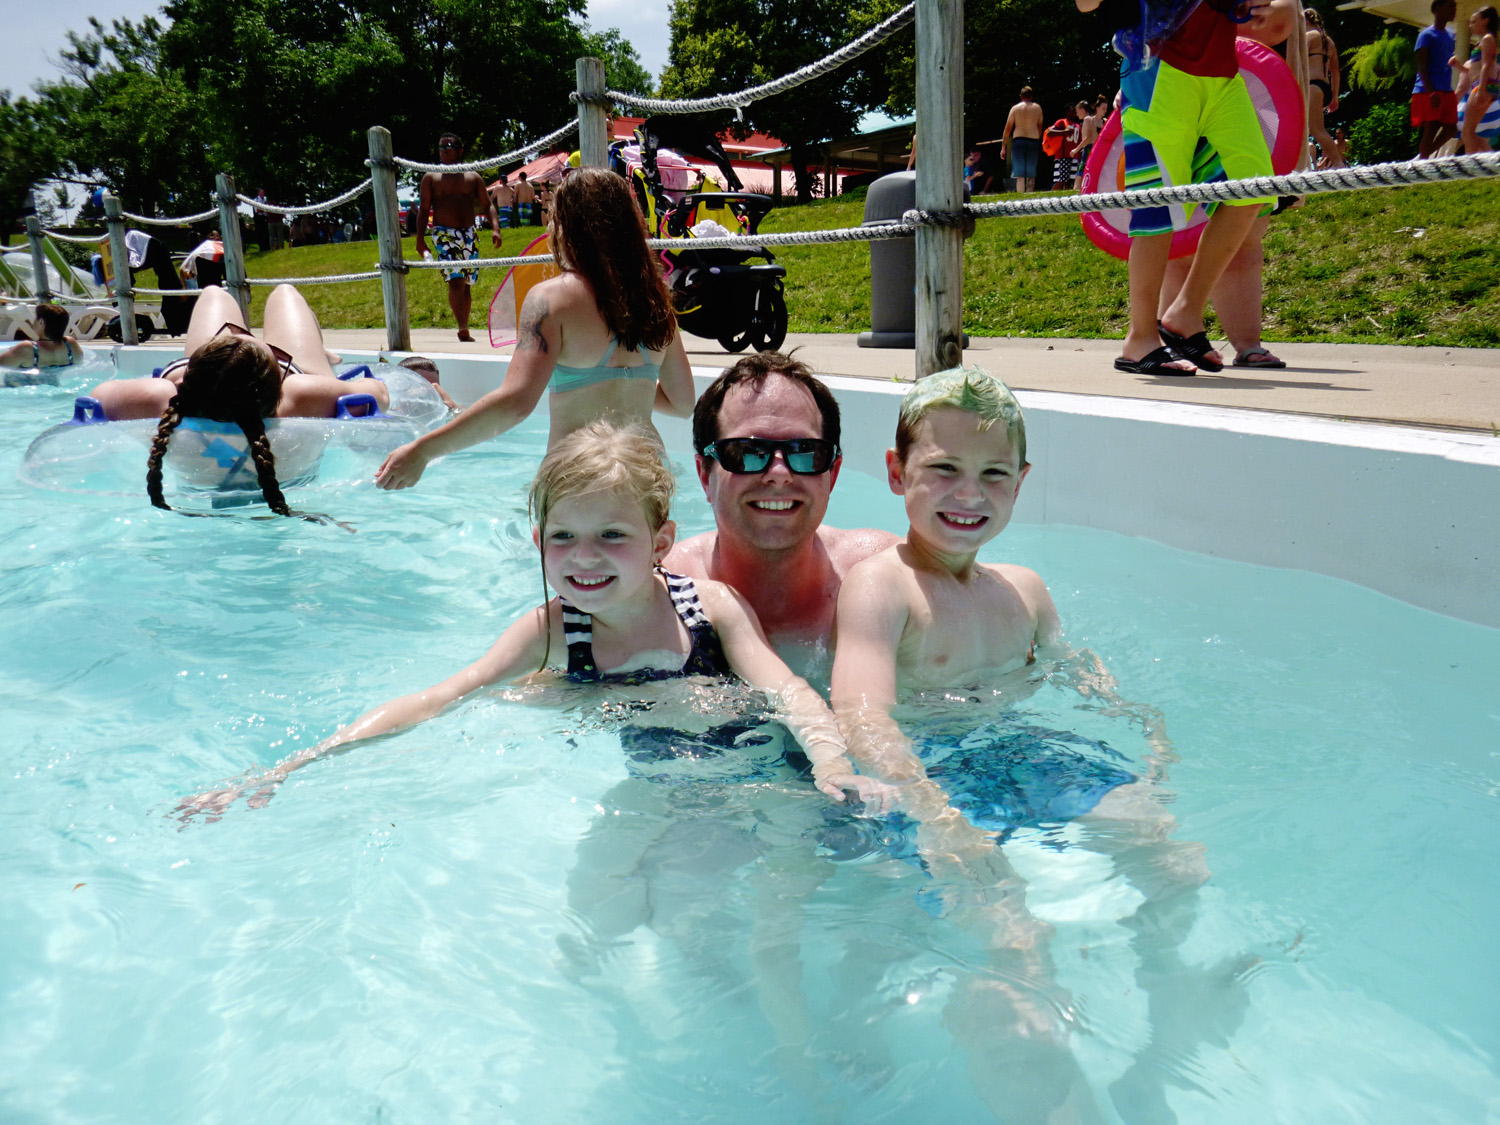 Oceans of Fun in Kansas City, Missouri has some of the best kiddie water areas in town! For celebration of a holiday, special occasion or just making fun memories with your family. This is a visit you don't want to miss.